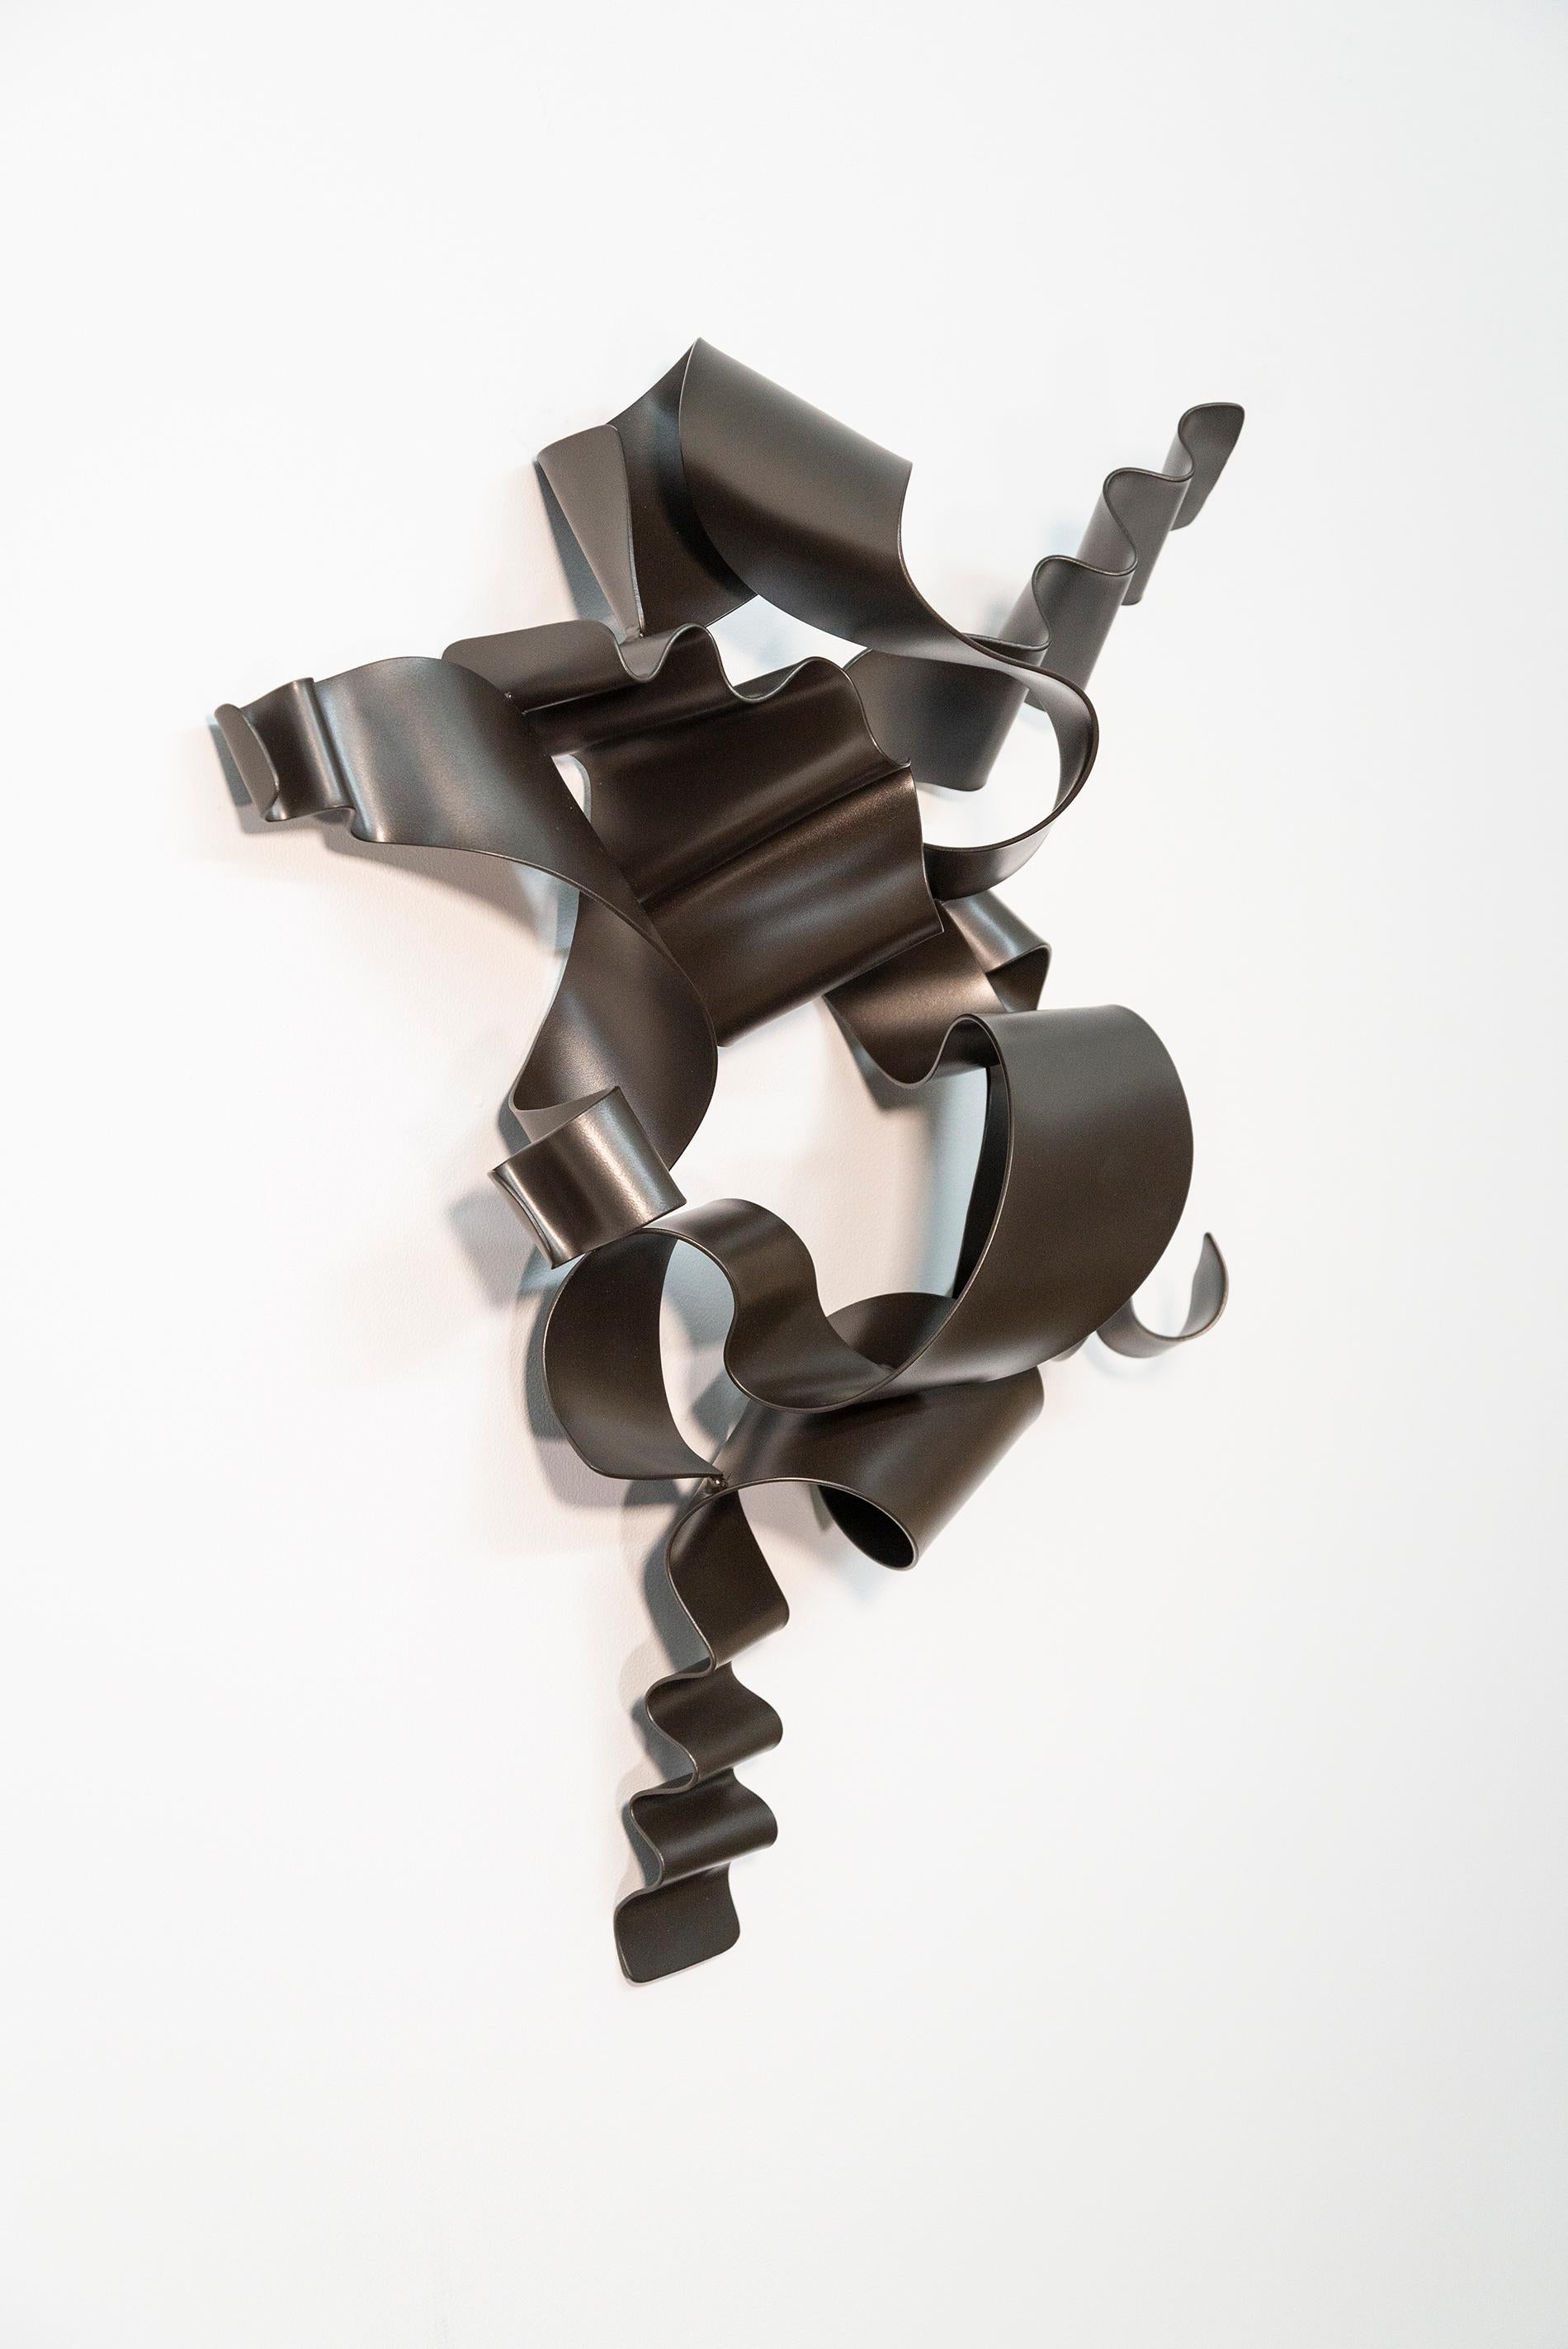 Expressive and lyrical, Stefan Duerst’s dynamic wall sculptures are visually arresting contemporary pieces. Hand forged from ribbons of steel and coated in black, several ribbons undulate, curl and ‘flow’ around one another. The German born artist